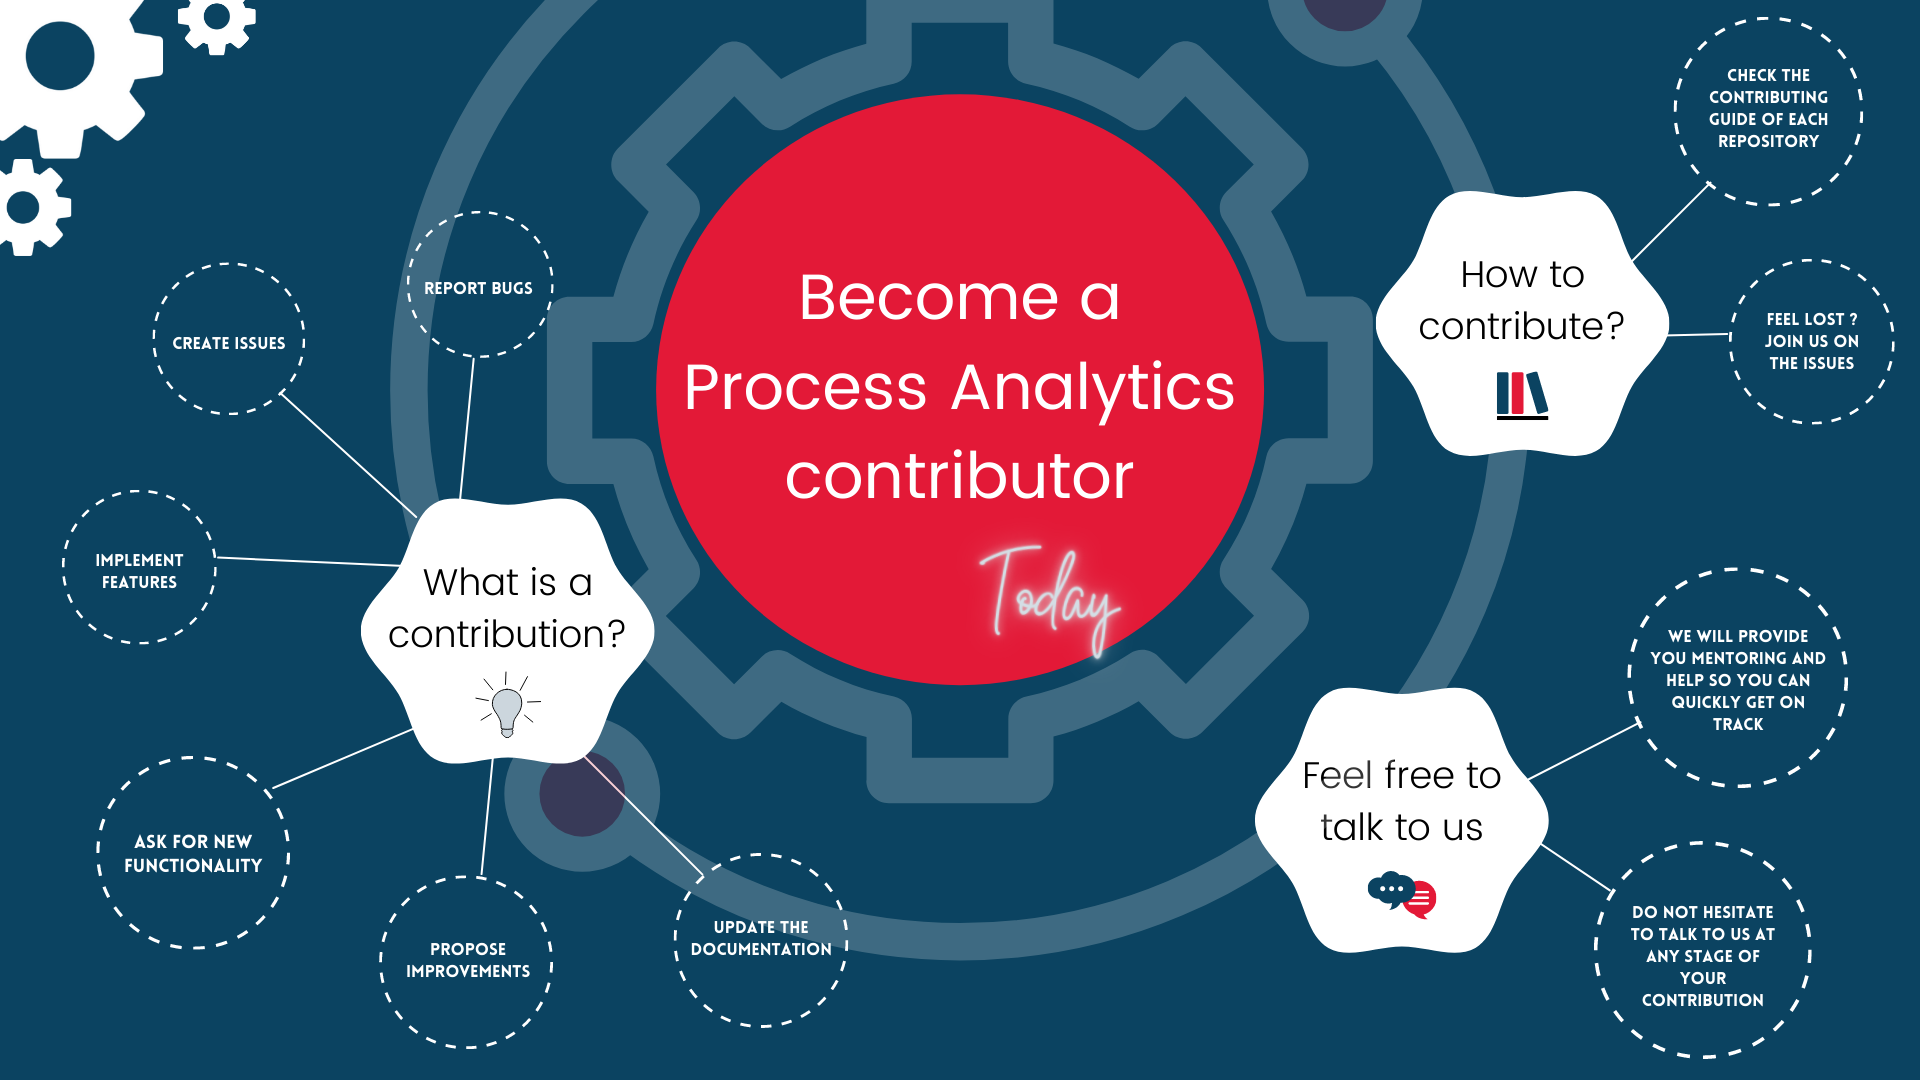 An cheat sheet showing how to quickly contribute to the Process Analytics project